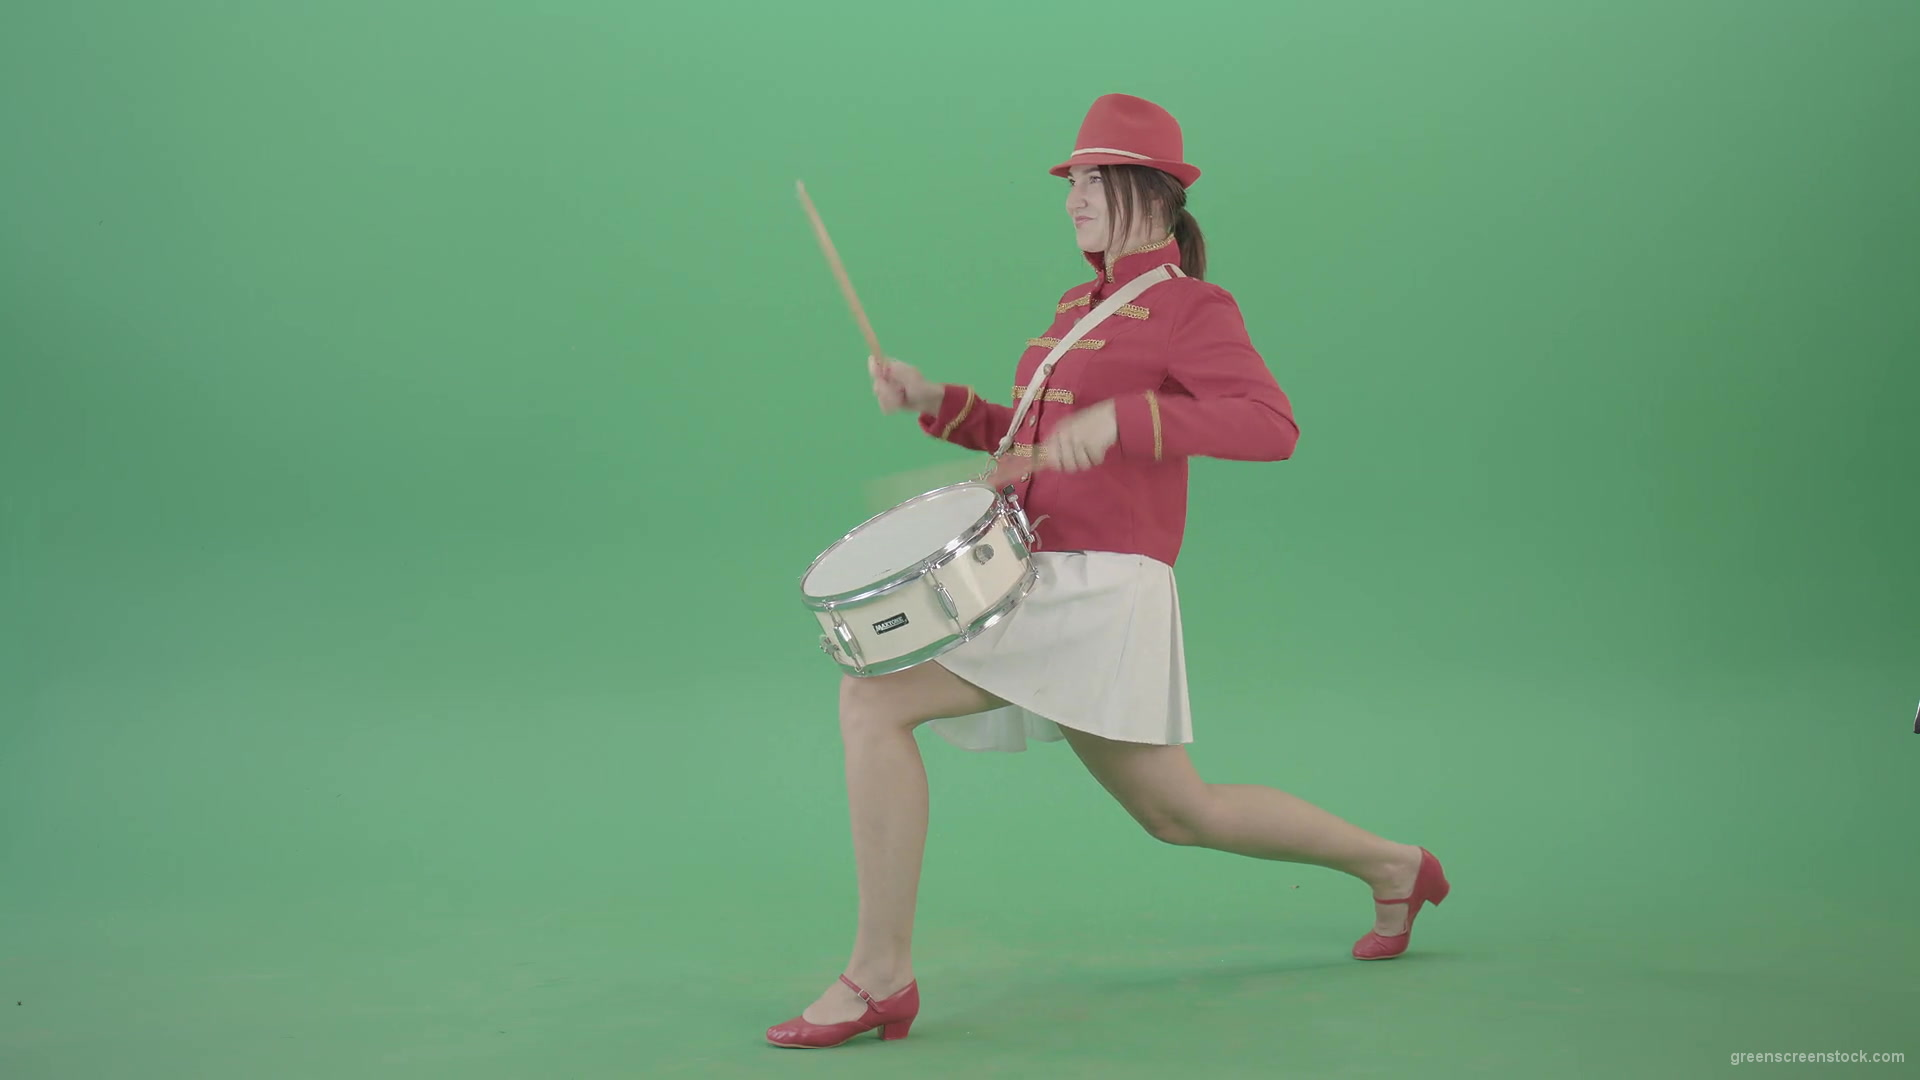 Stupid-funny-advertising-video-footage-with-drumming-girl-isolated-on-green-screen-4K-Video-Footage-1920_009 Green Screen Stock